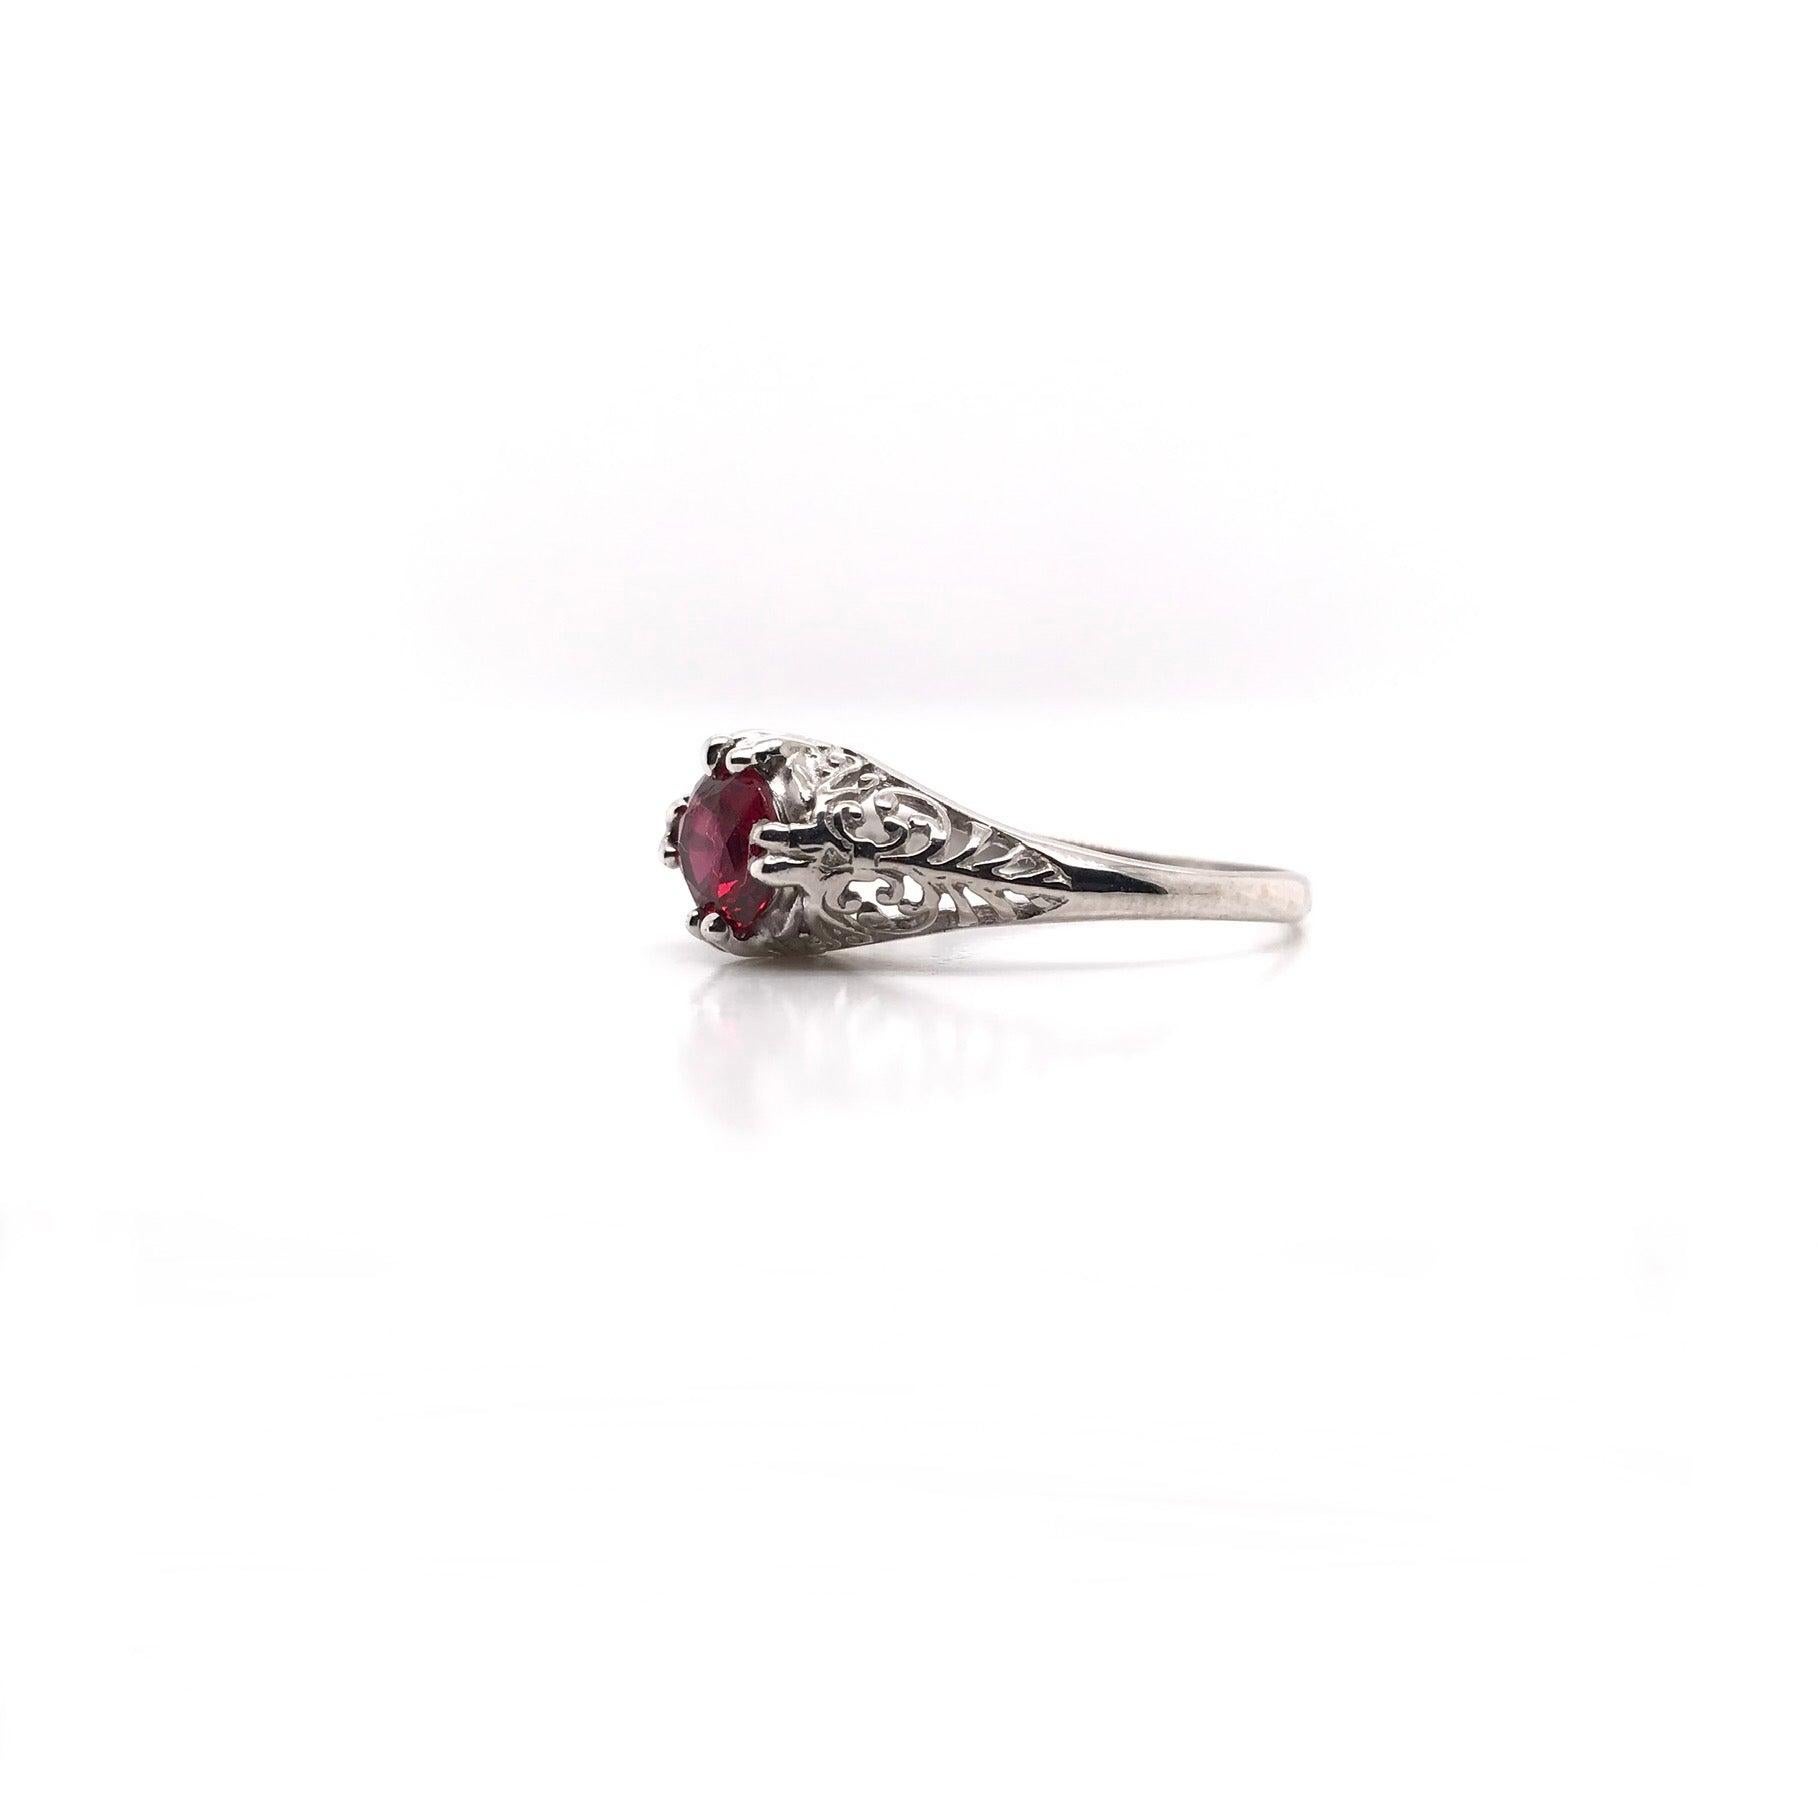 This antique piece was handcrafted sometime during the Art Deco design period ( 1920-1940 ). The center stone is a gorgeous, richly hued, ruby. The color is rich, vibrant, and absolutely captivating. The center ruby measures approximately 0.92